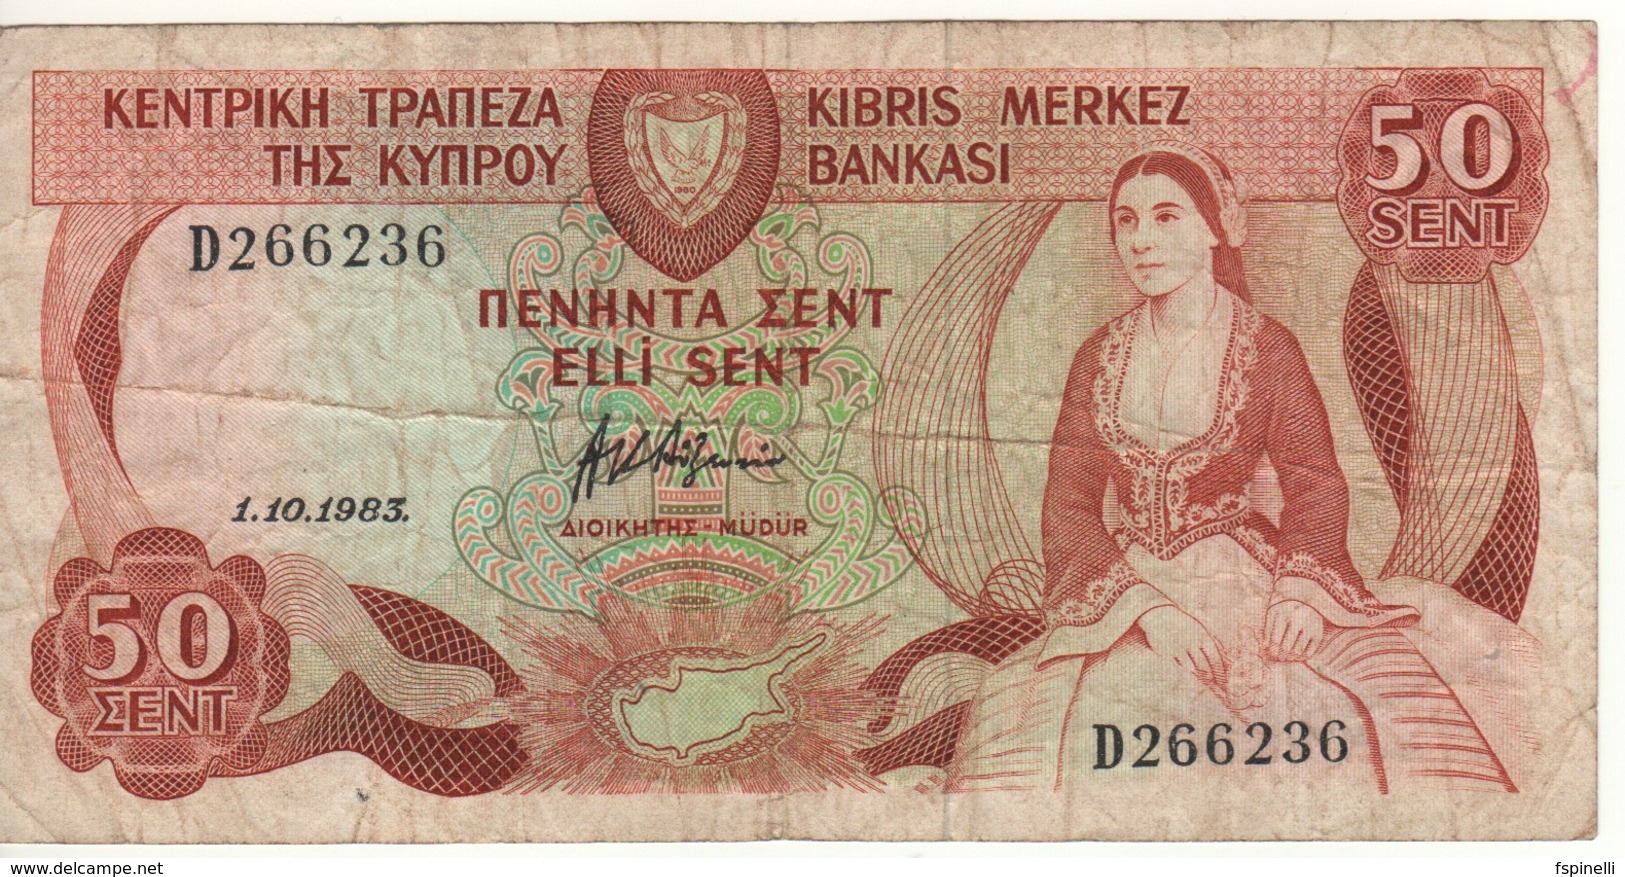 CYPRUS   50 Cents      P49      1.10.1983 - Chipre